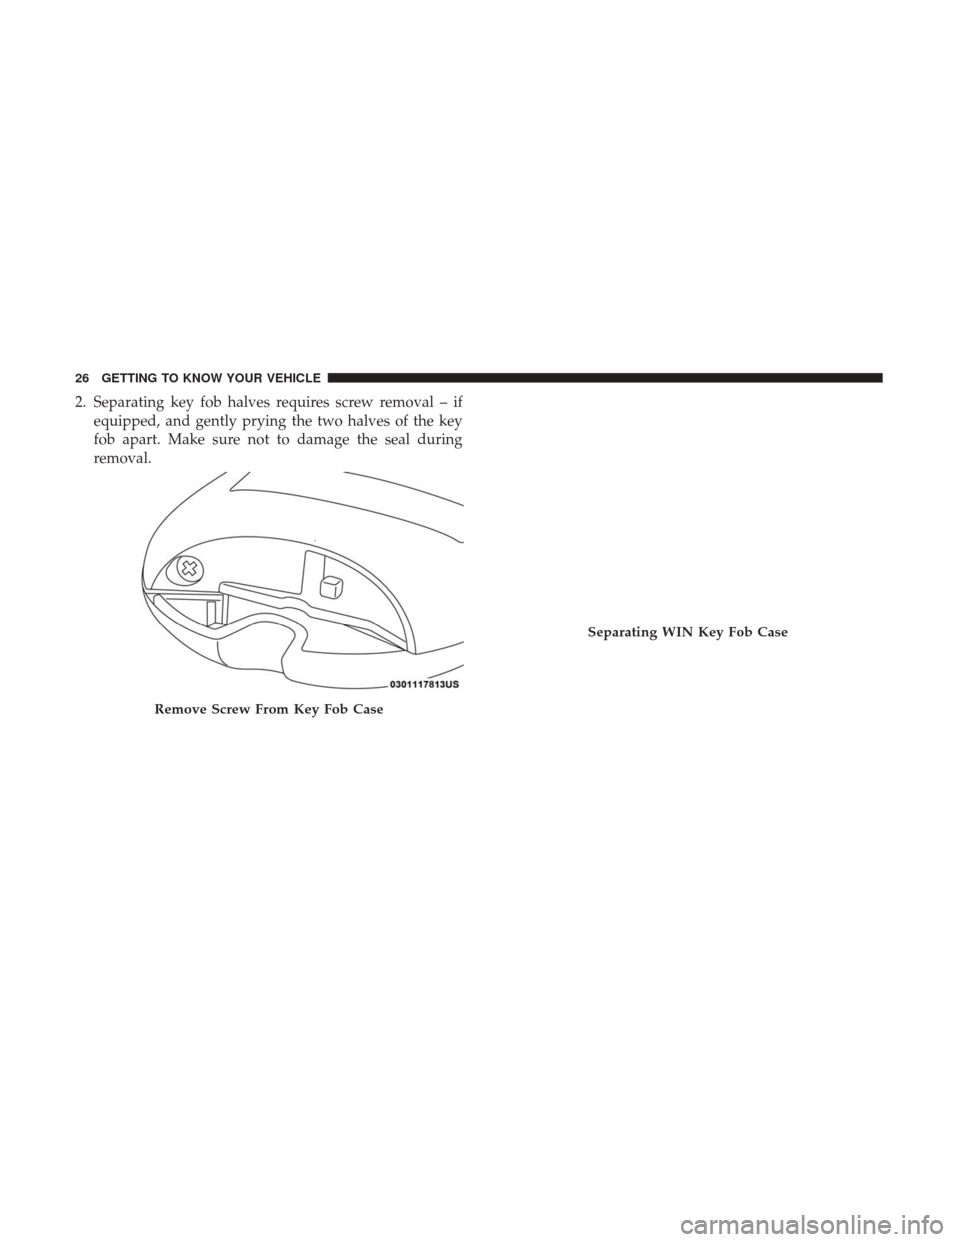 Ram 1500 2018  Owners Manual 2. Separating key fob halves requires screw removal – ifequipped, and gently prying the two halves of the key
fob apart. Make sure not to damage the seal during
removal.
Remove Screw From Key Fob Ca